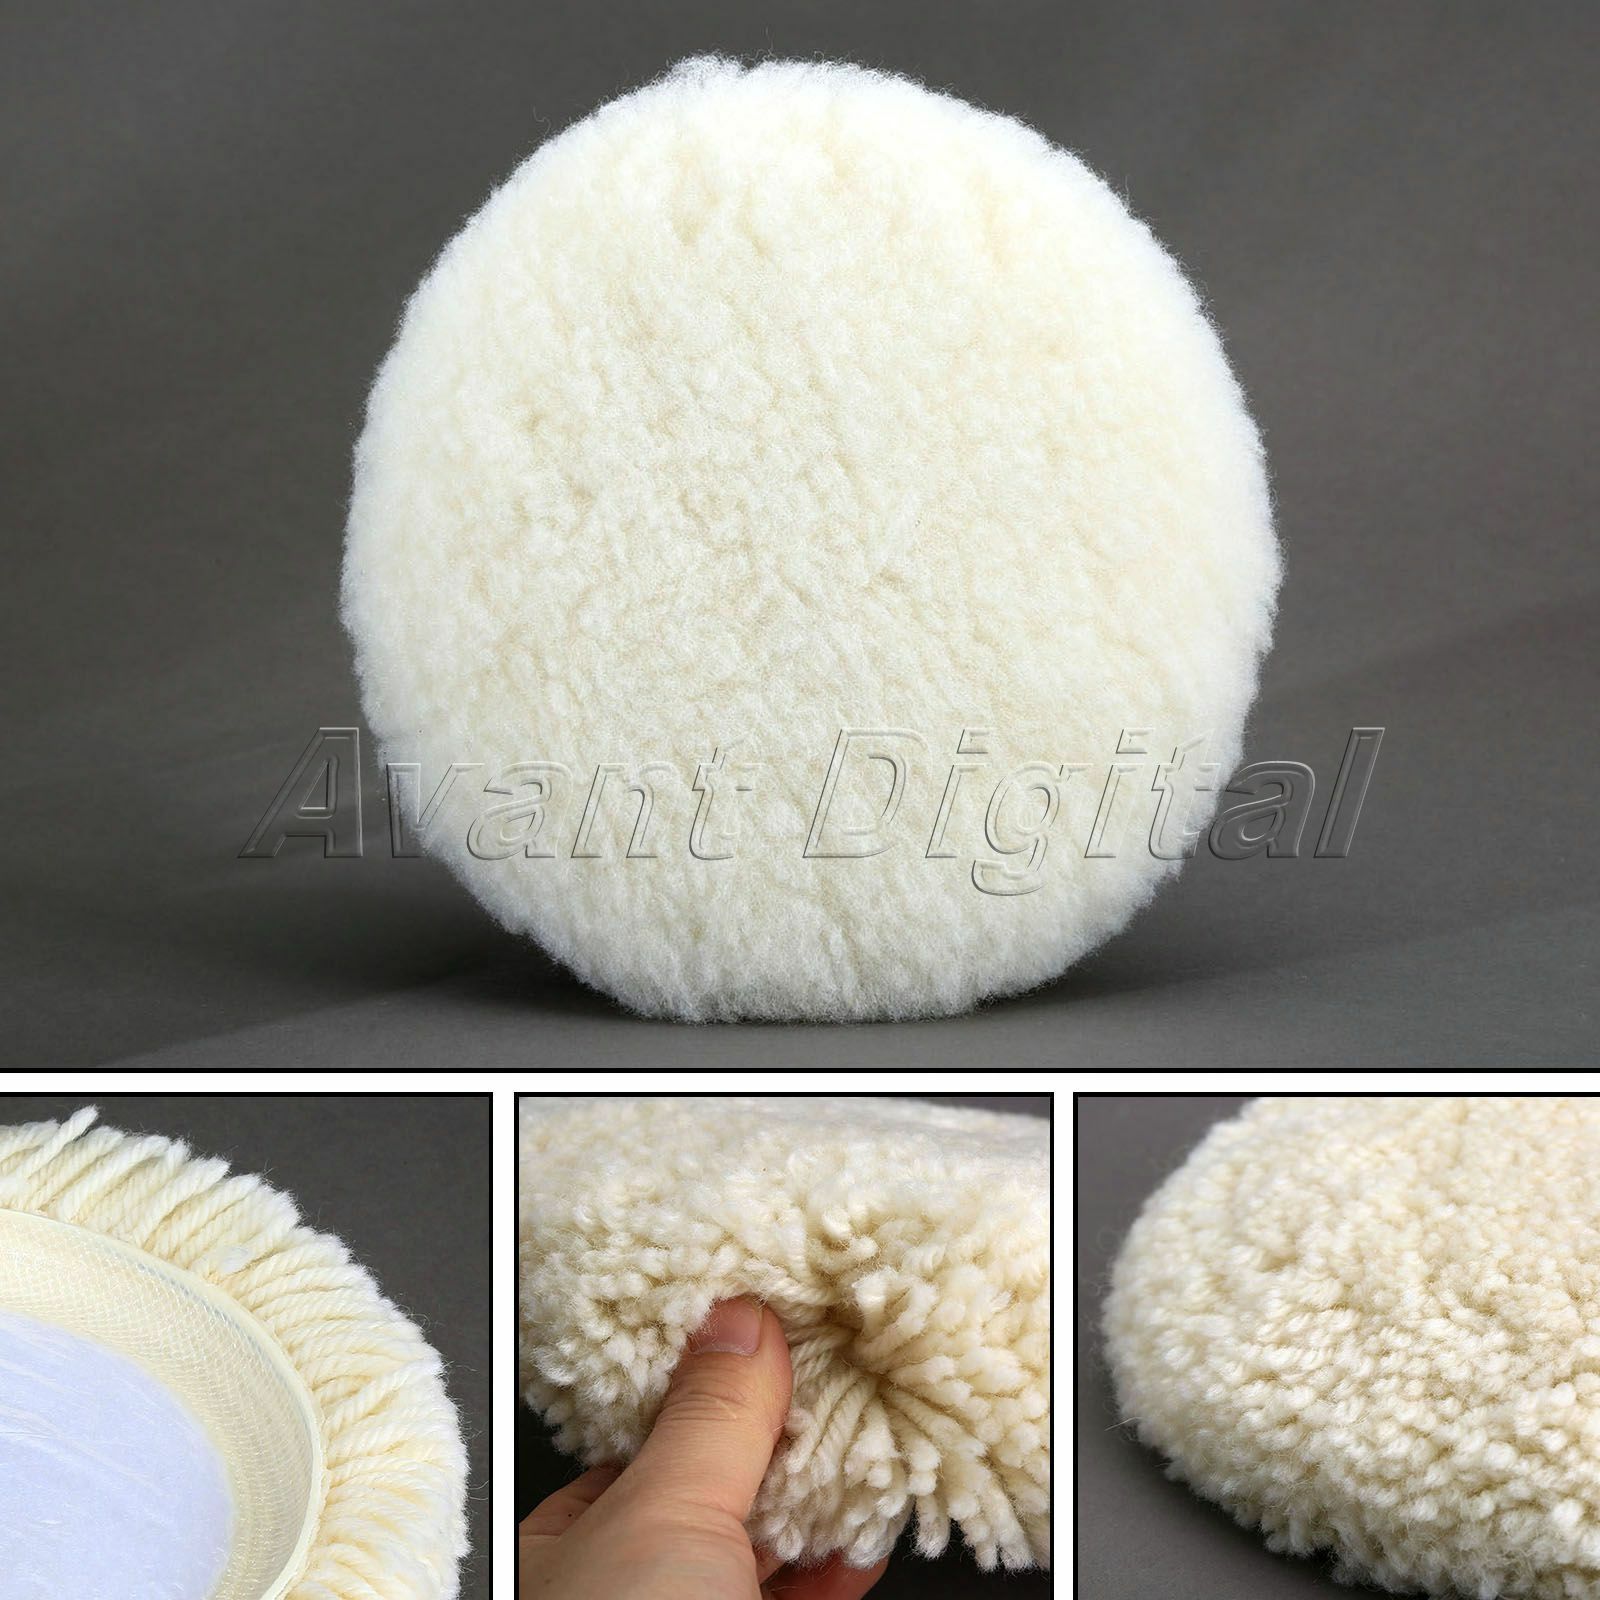 180MM 7 inch Soft Wool Polishers Polishing Buffing Pad Bonnet for Car Cleaning